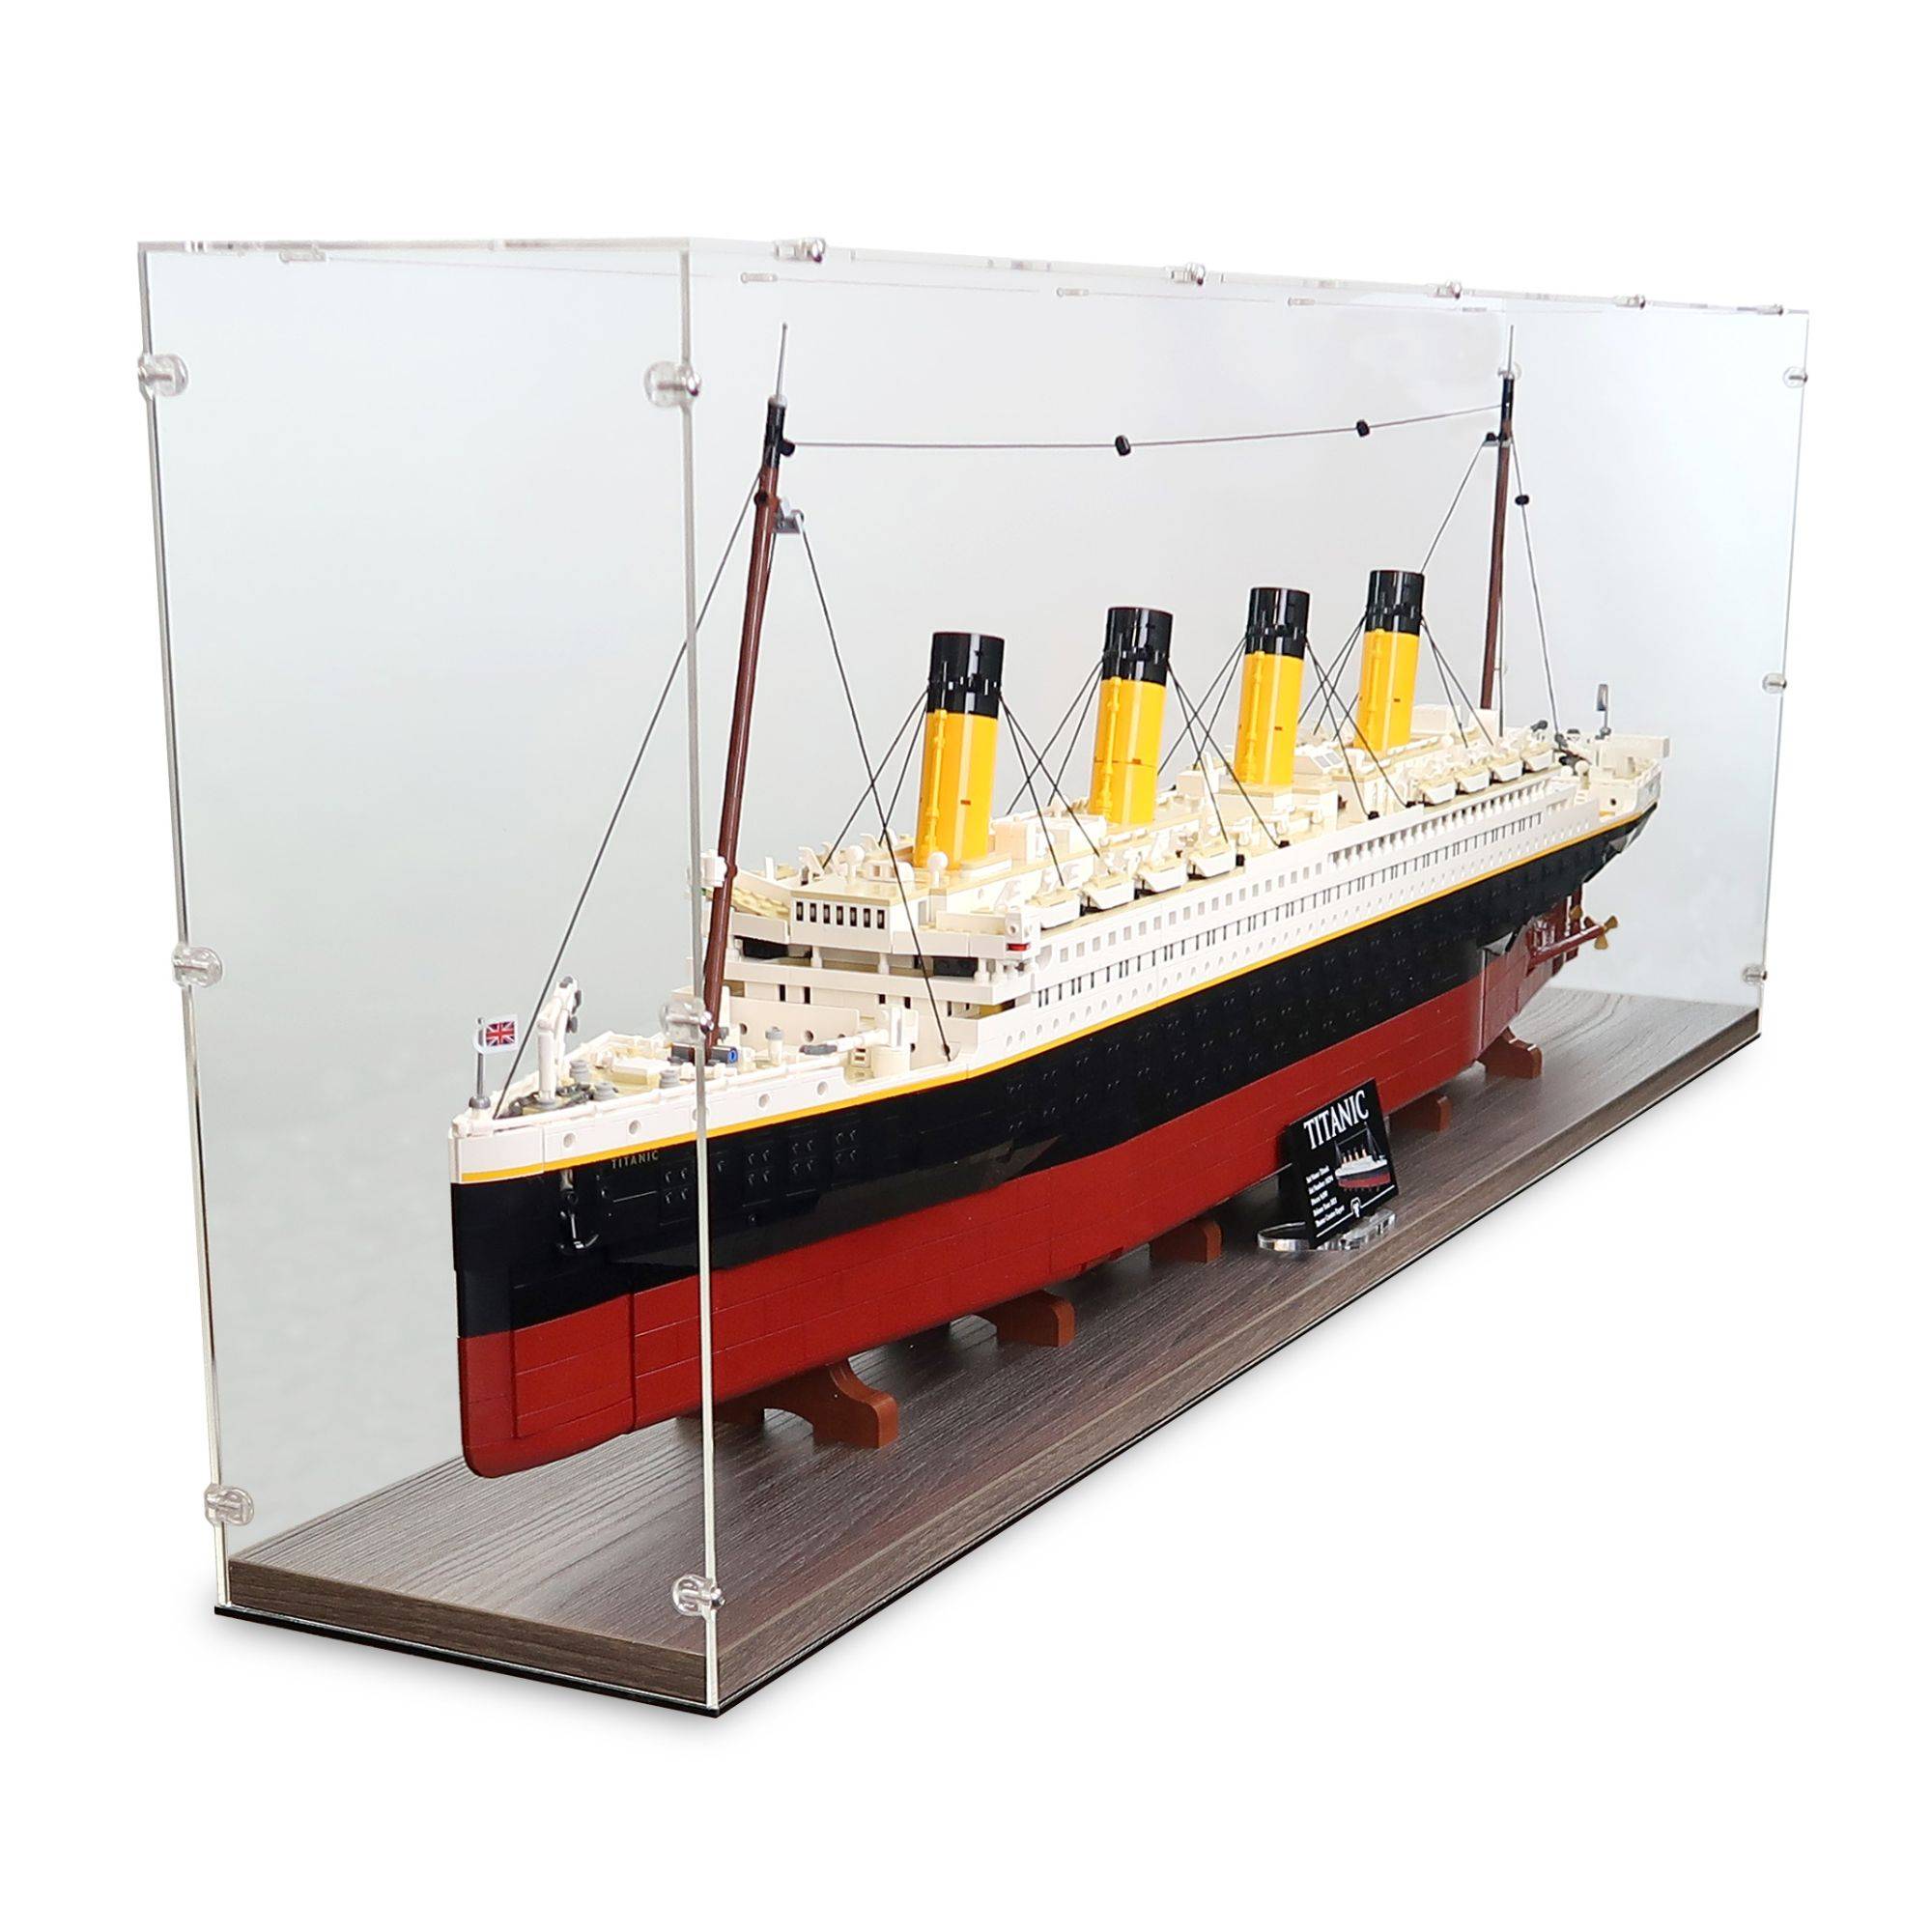 Acrylic Displays for your Lego Models-Lego 10294 Titanic Display Case